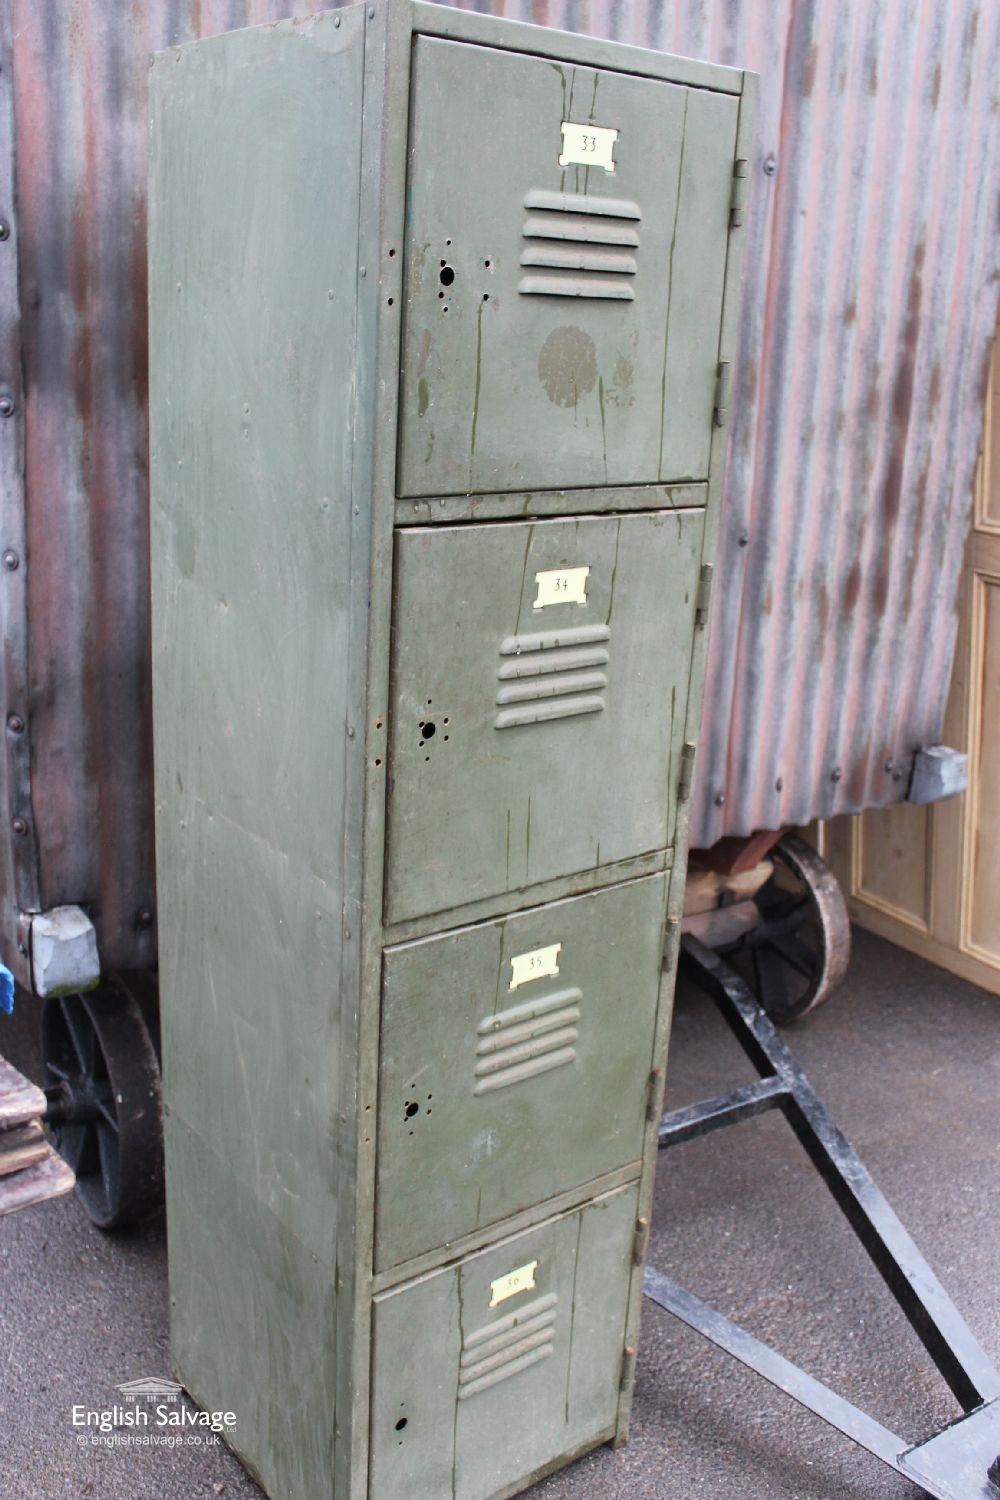 Lovely cabinet with four individual compartments. Doors are vented and are each numbered 33 through to 36.

Bit rusty in places but condition is sound, doors all open and close nicely.